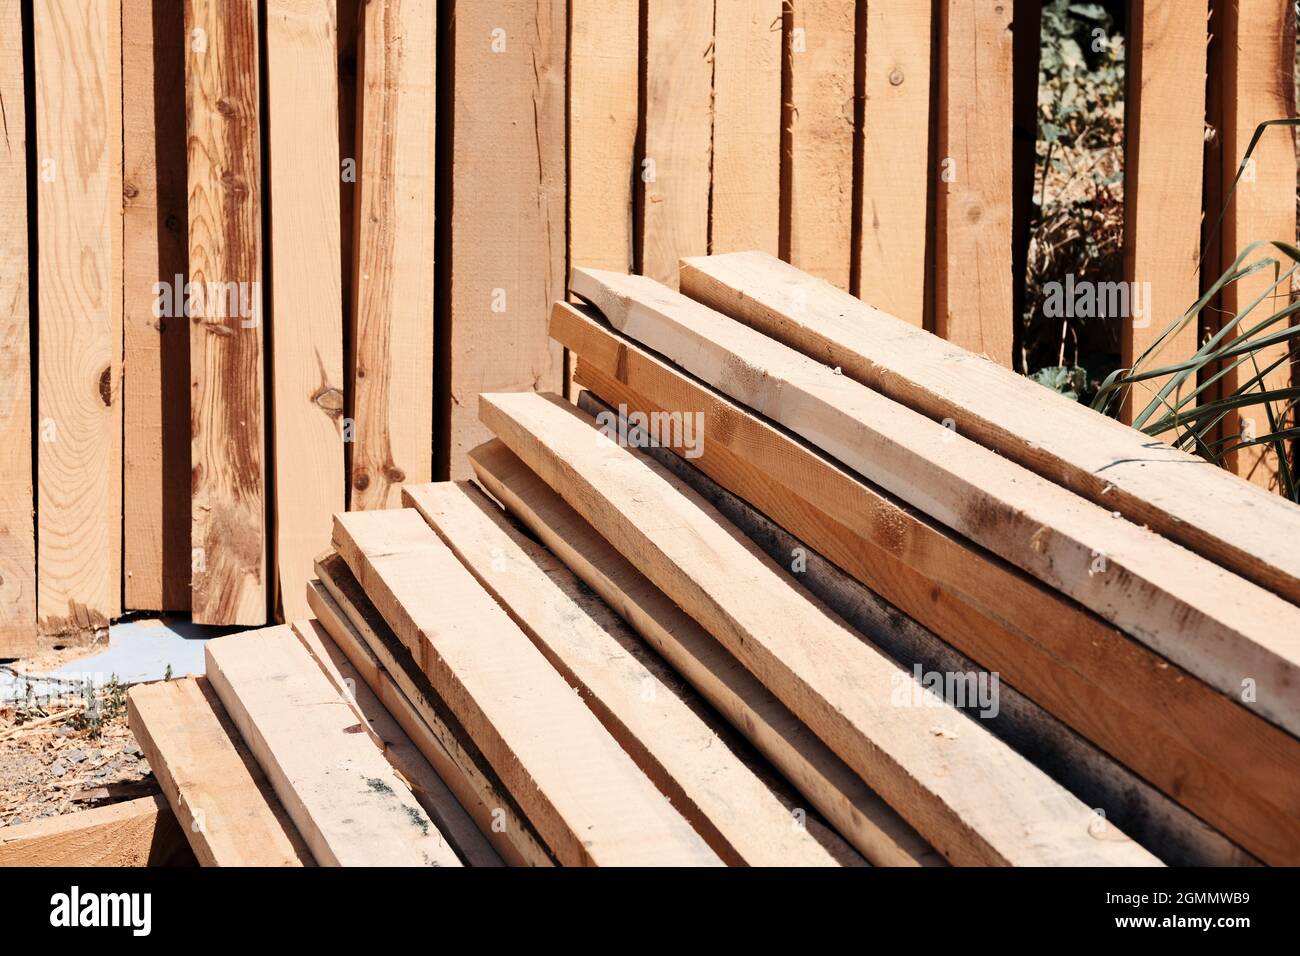 Stack of sawed wooden planks or timber at a construction site. Stock Photo